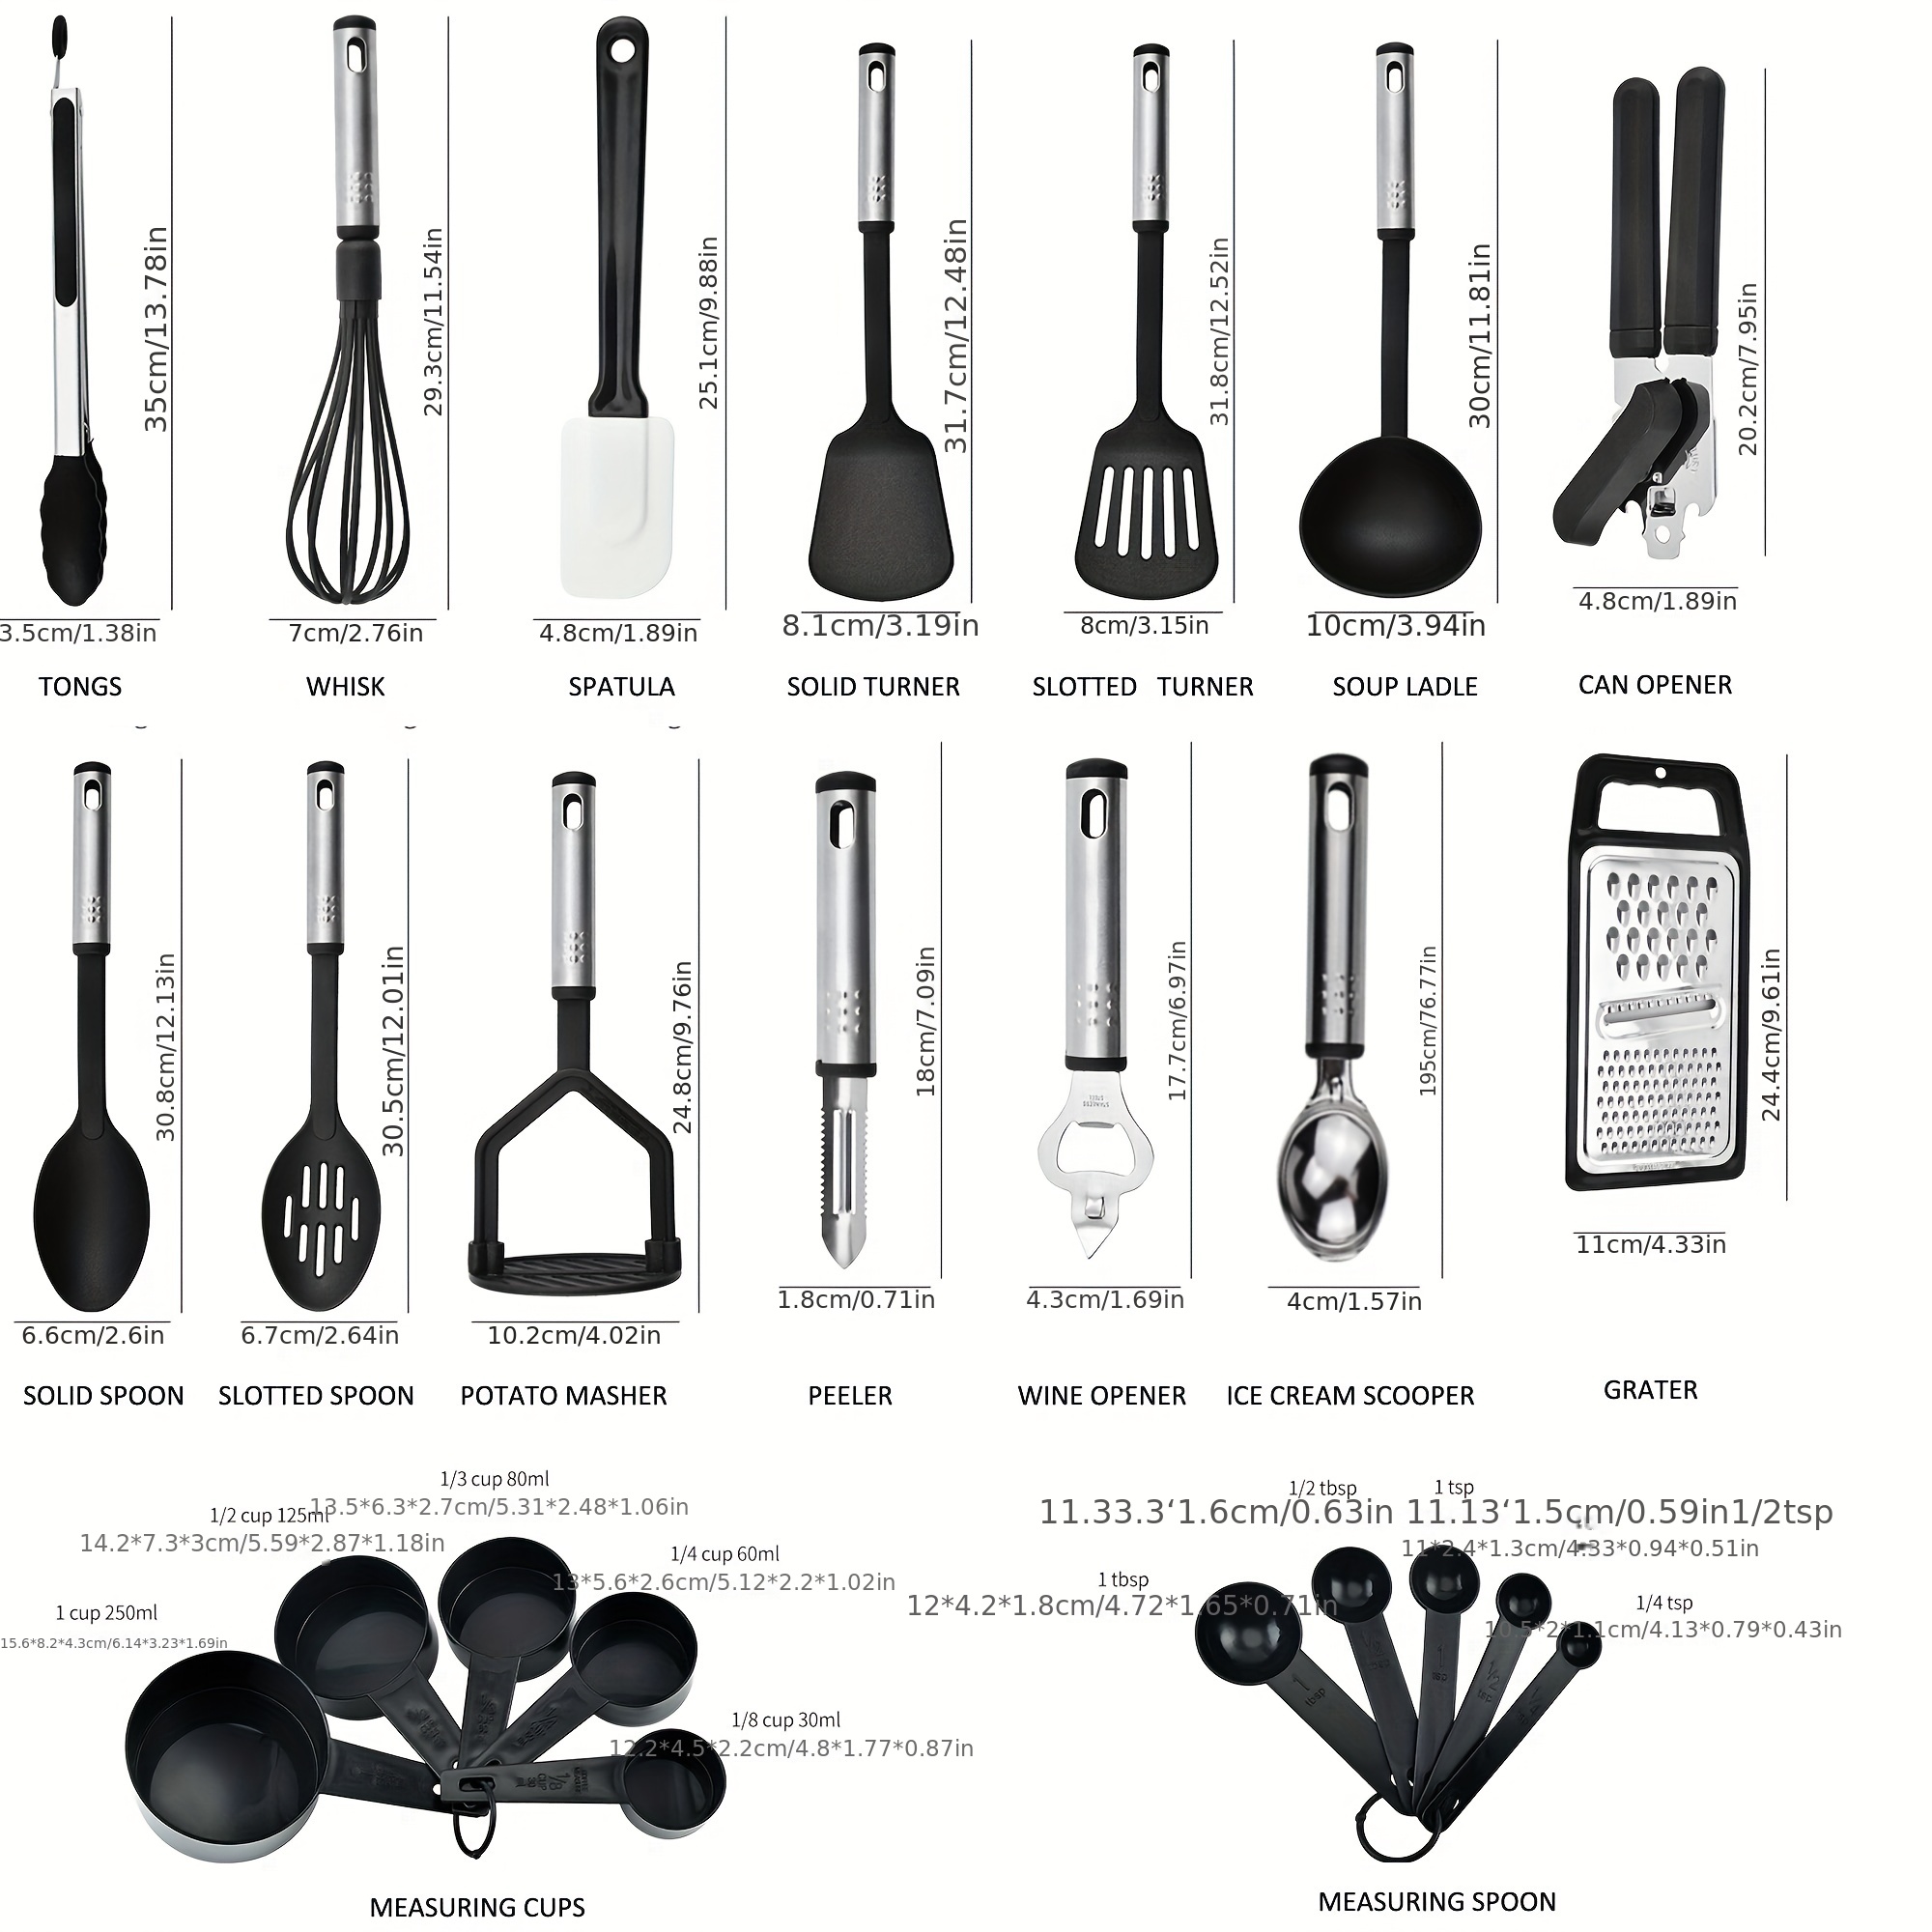  Kitchen Utensils Set, Cooking Utensil Sets Kitchen Gadgets,  Pots and Pans set Nonstick and Heat Resistant, 24 Pcs Nylon and Stainless  Steel, Spatula Set, Kitchen, Home, House, Essentials & Accessories 